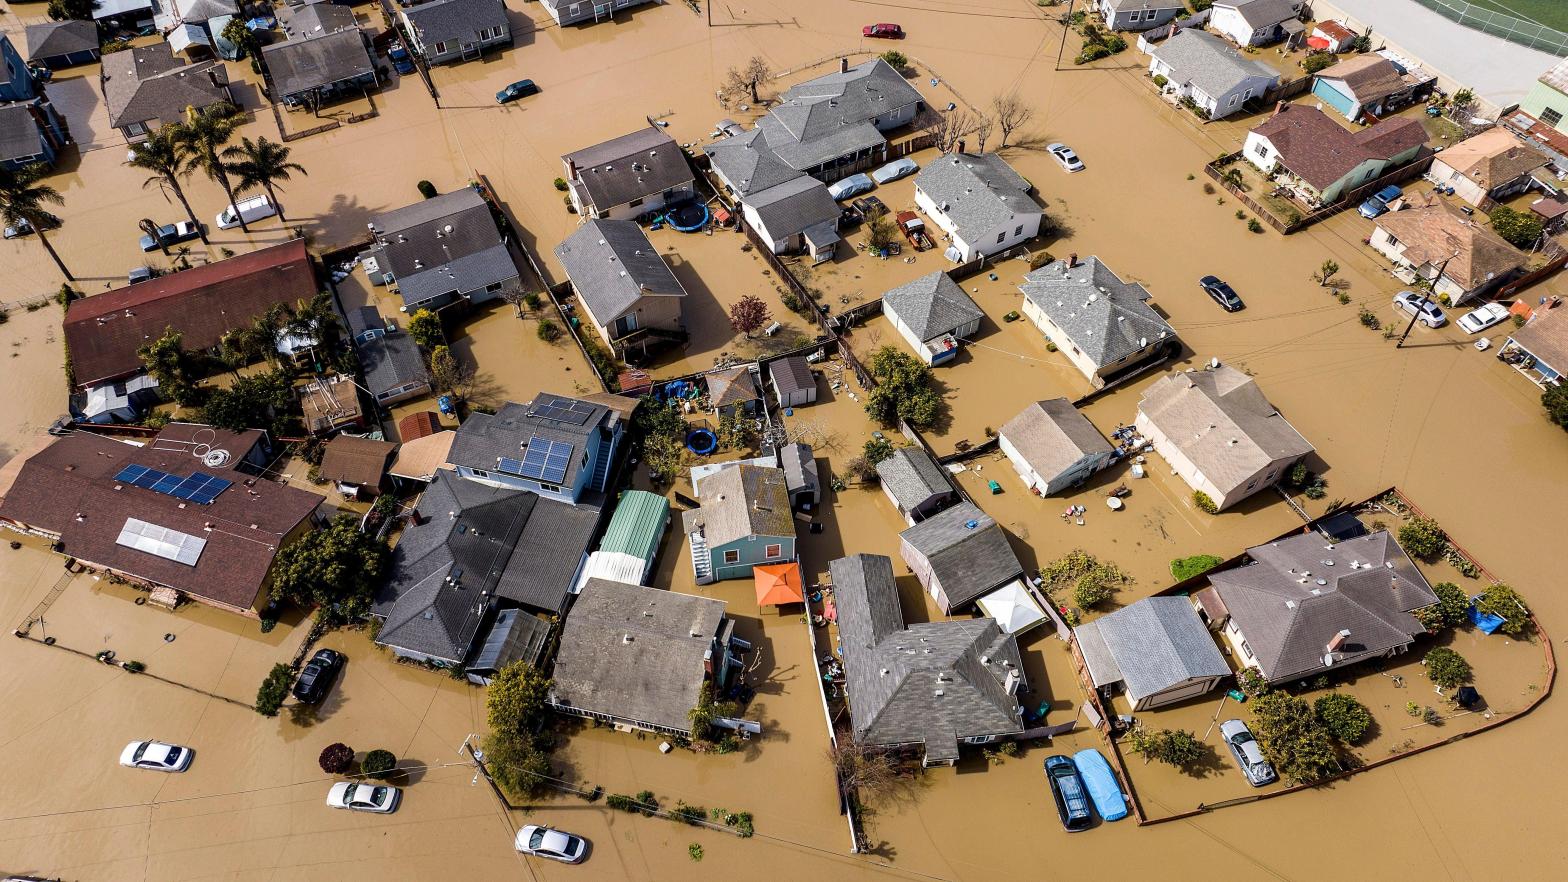 Floodwaters surround homes and vehicles in the community of Pajaro in Monterey County, California on March 13, 2023. (Photo: Noah Berger, AP)